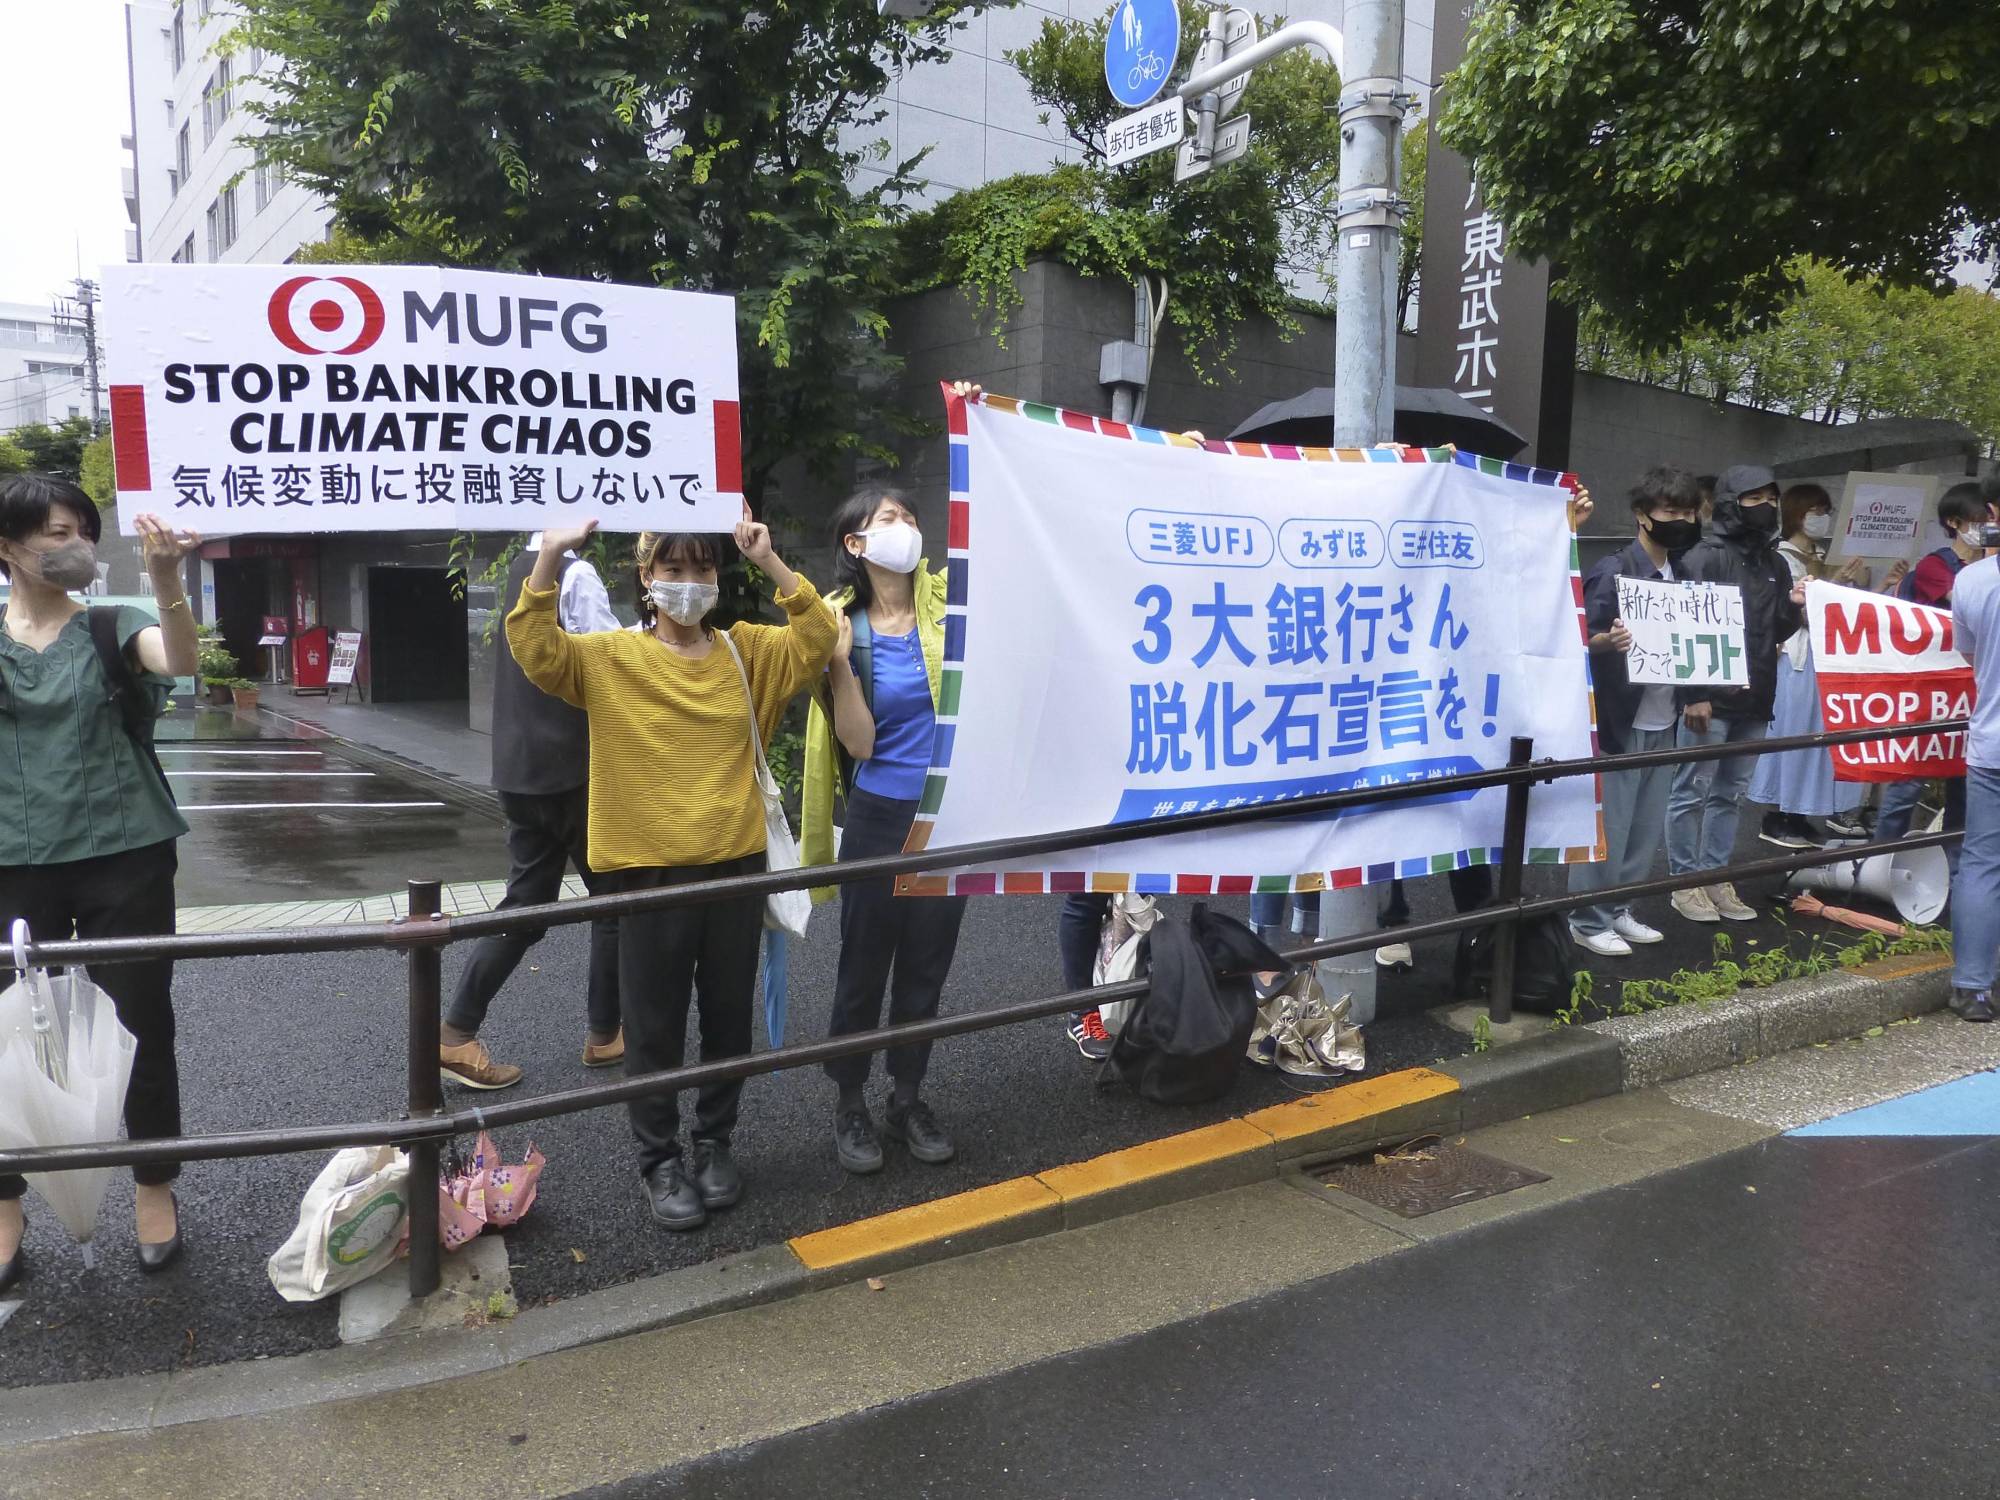 MUFJ board beats back climate resolution as activists falter in Japan